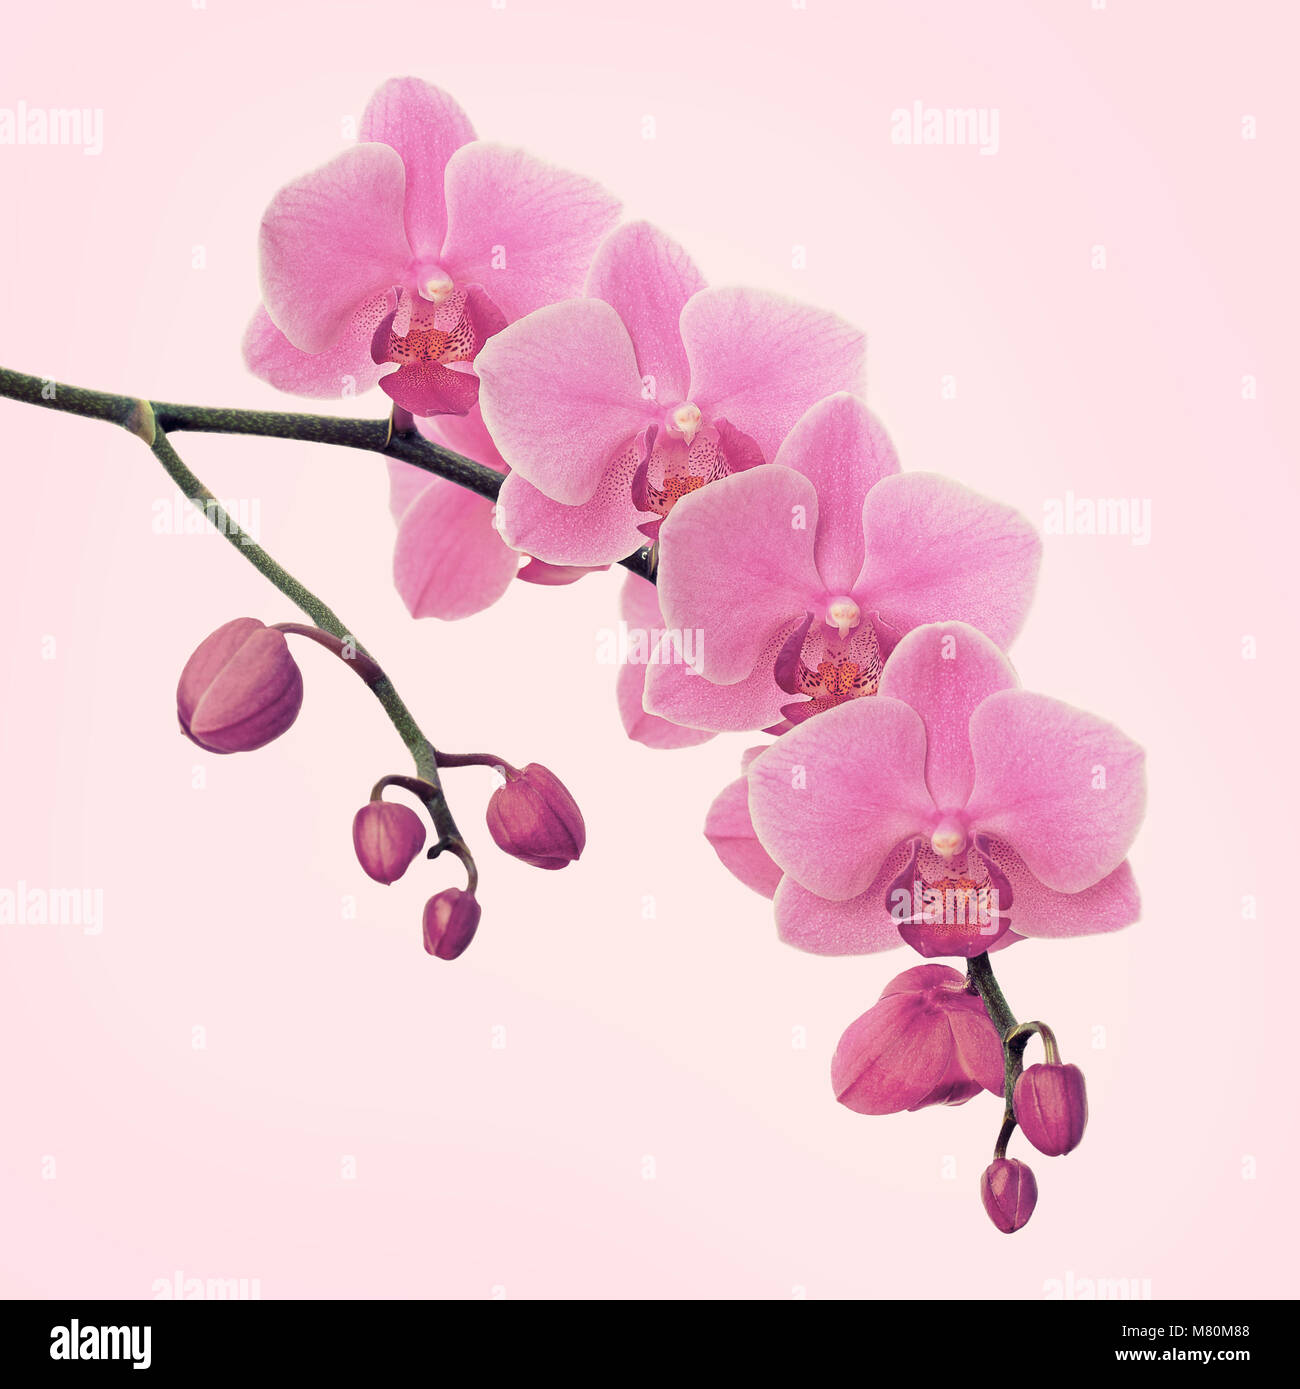 Branch of orchid flowers Stock Photo